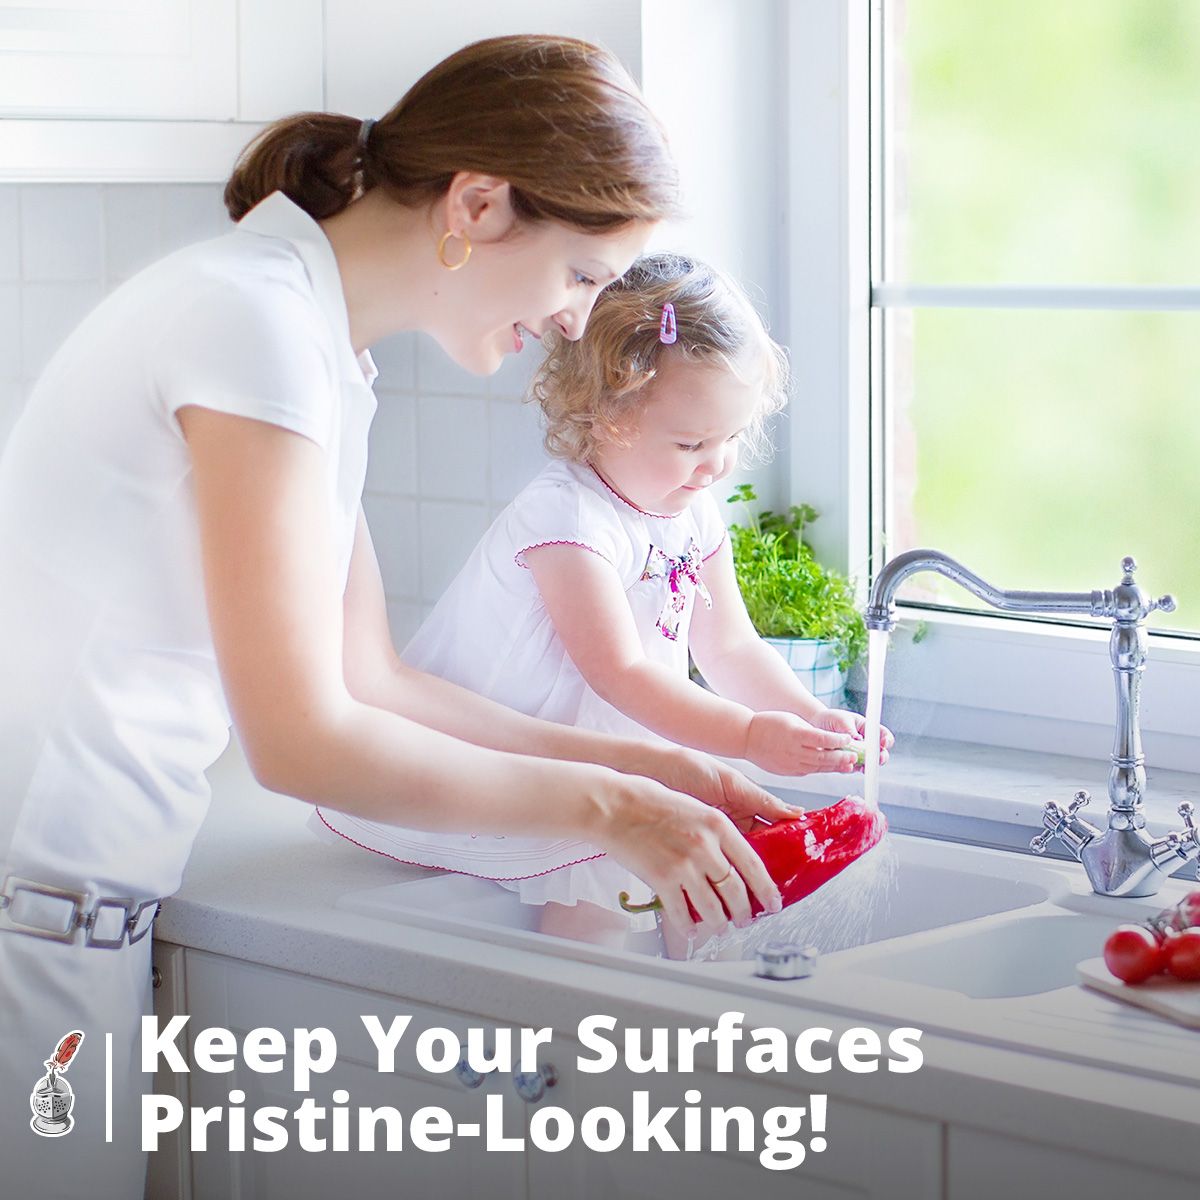 Keep Your Surfaces Pristine-Looking!